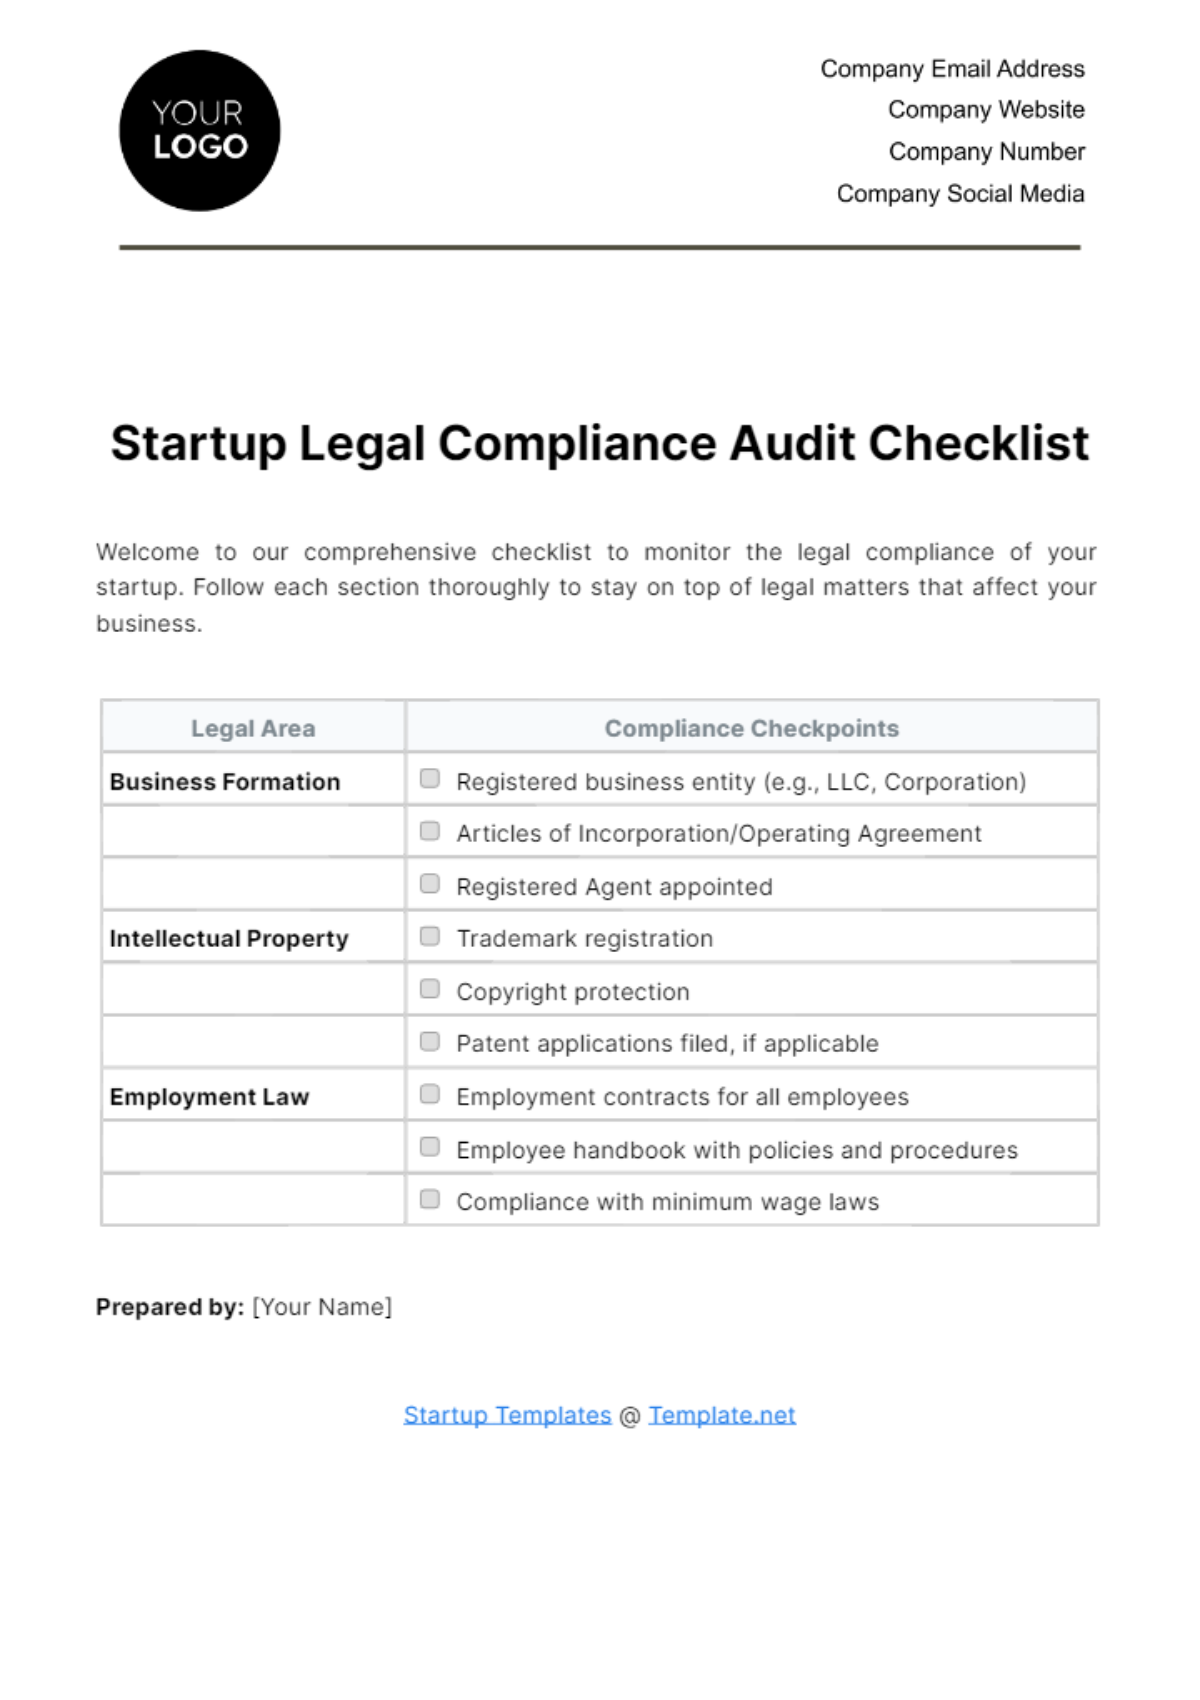 Free Startup Legal Compliance Audit Checklist Template